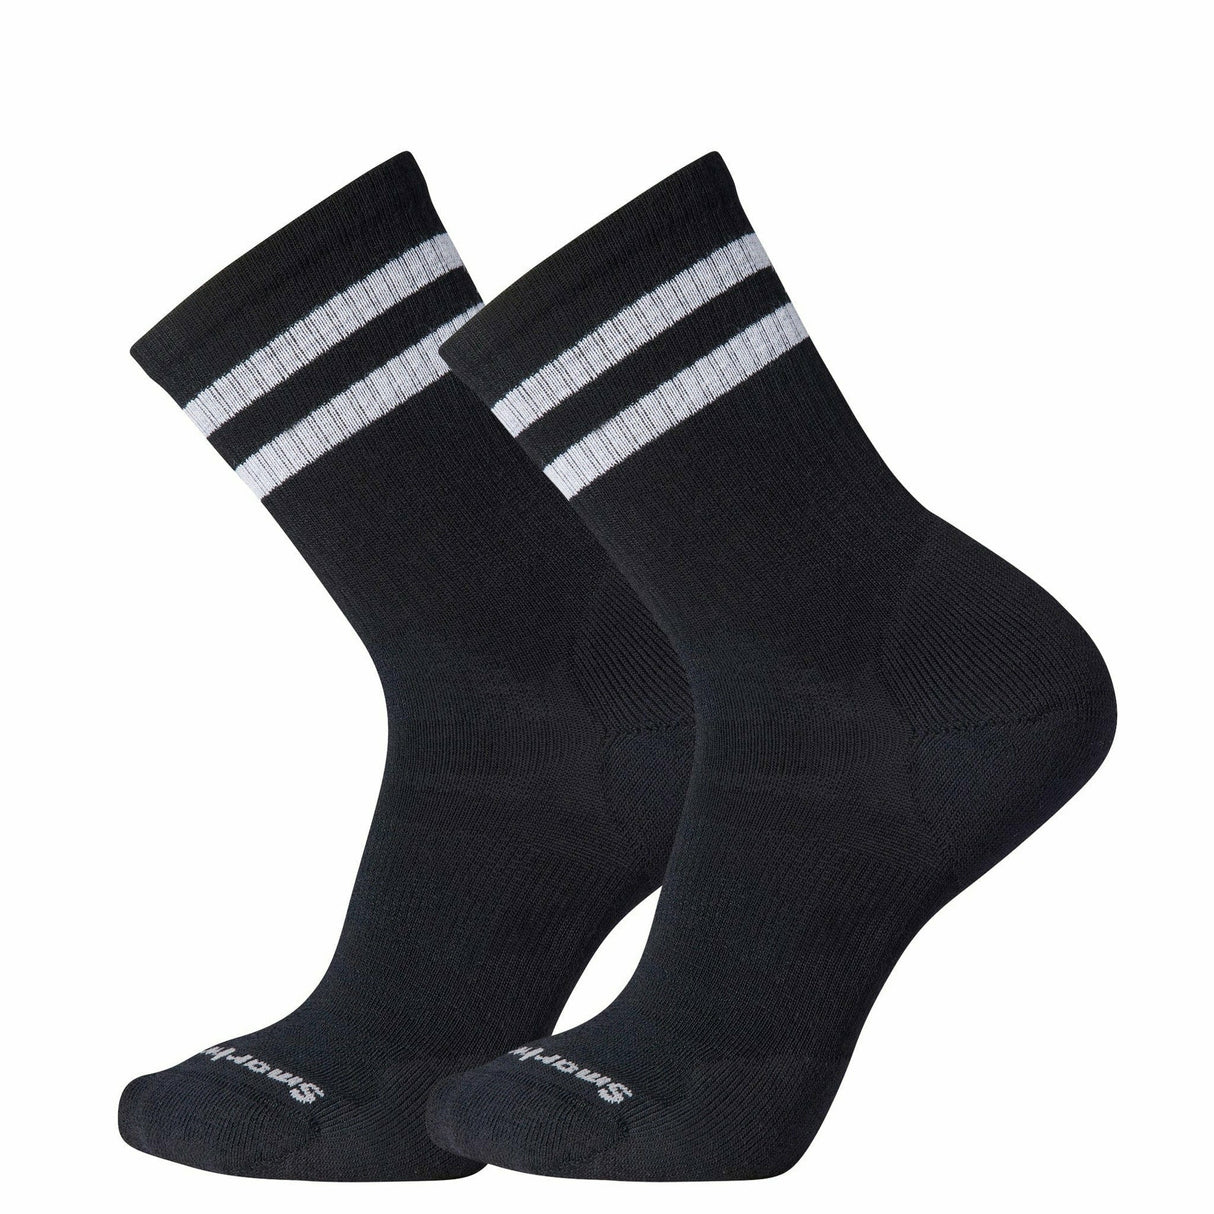 Smartwool Athletic Targeted Cushion Stripe Crew 2-Pack Socks  -  Small / Black